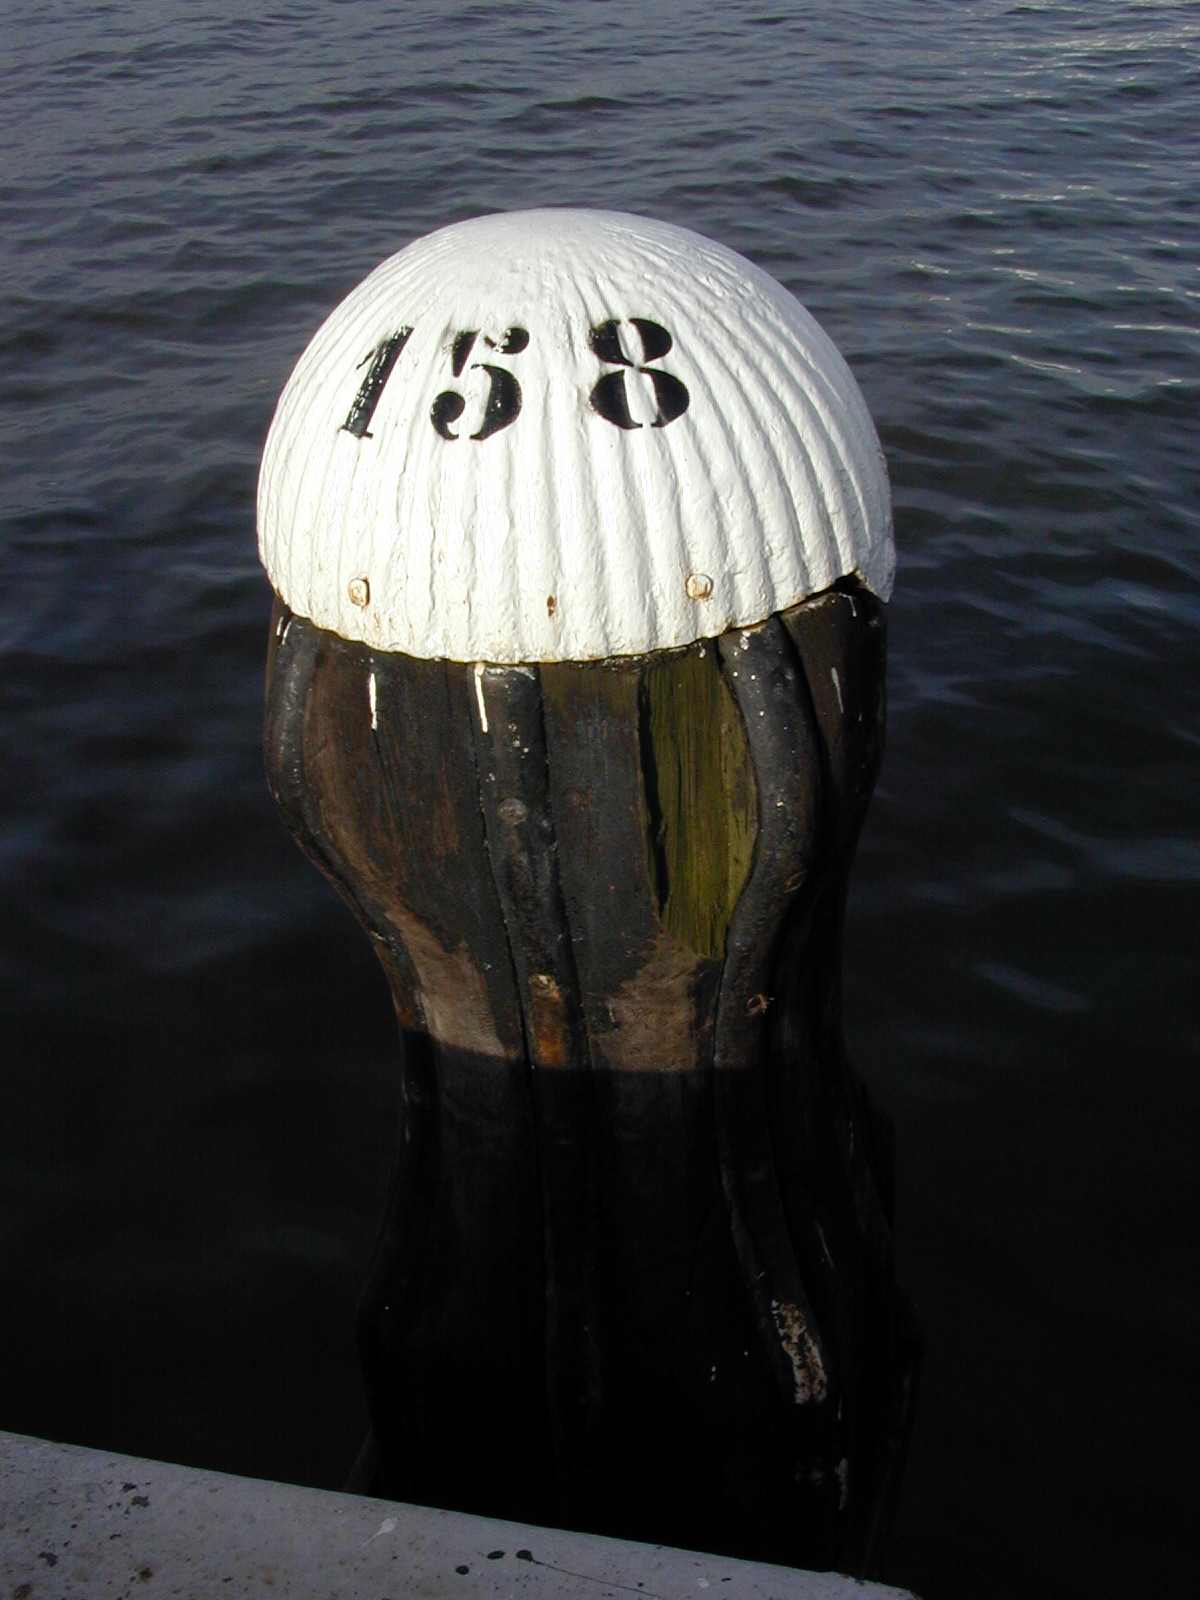 typo typography numbers old 158 1 5 8 wharf quay objects sphere water